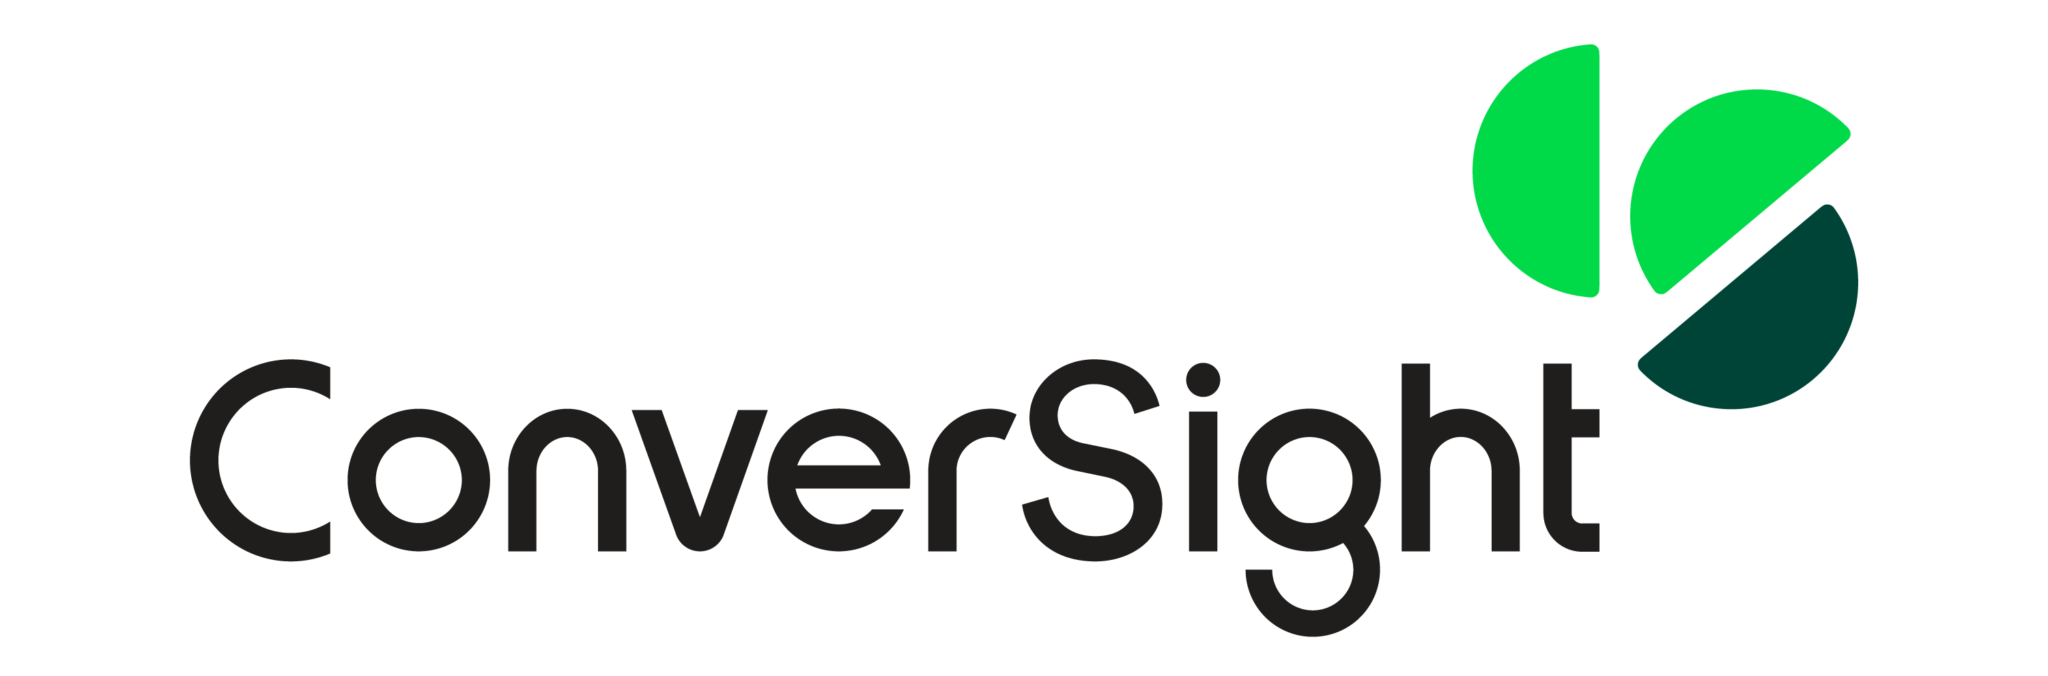 ConverSight Names Vertosoft as a new Partner to Empower Federal ...